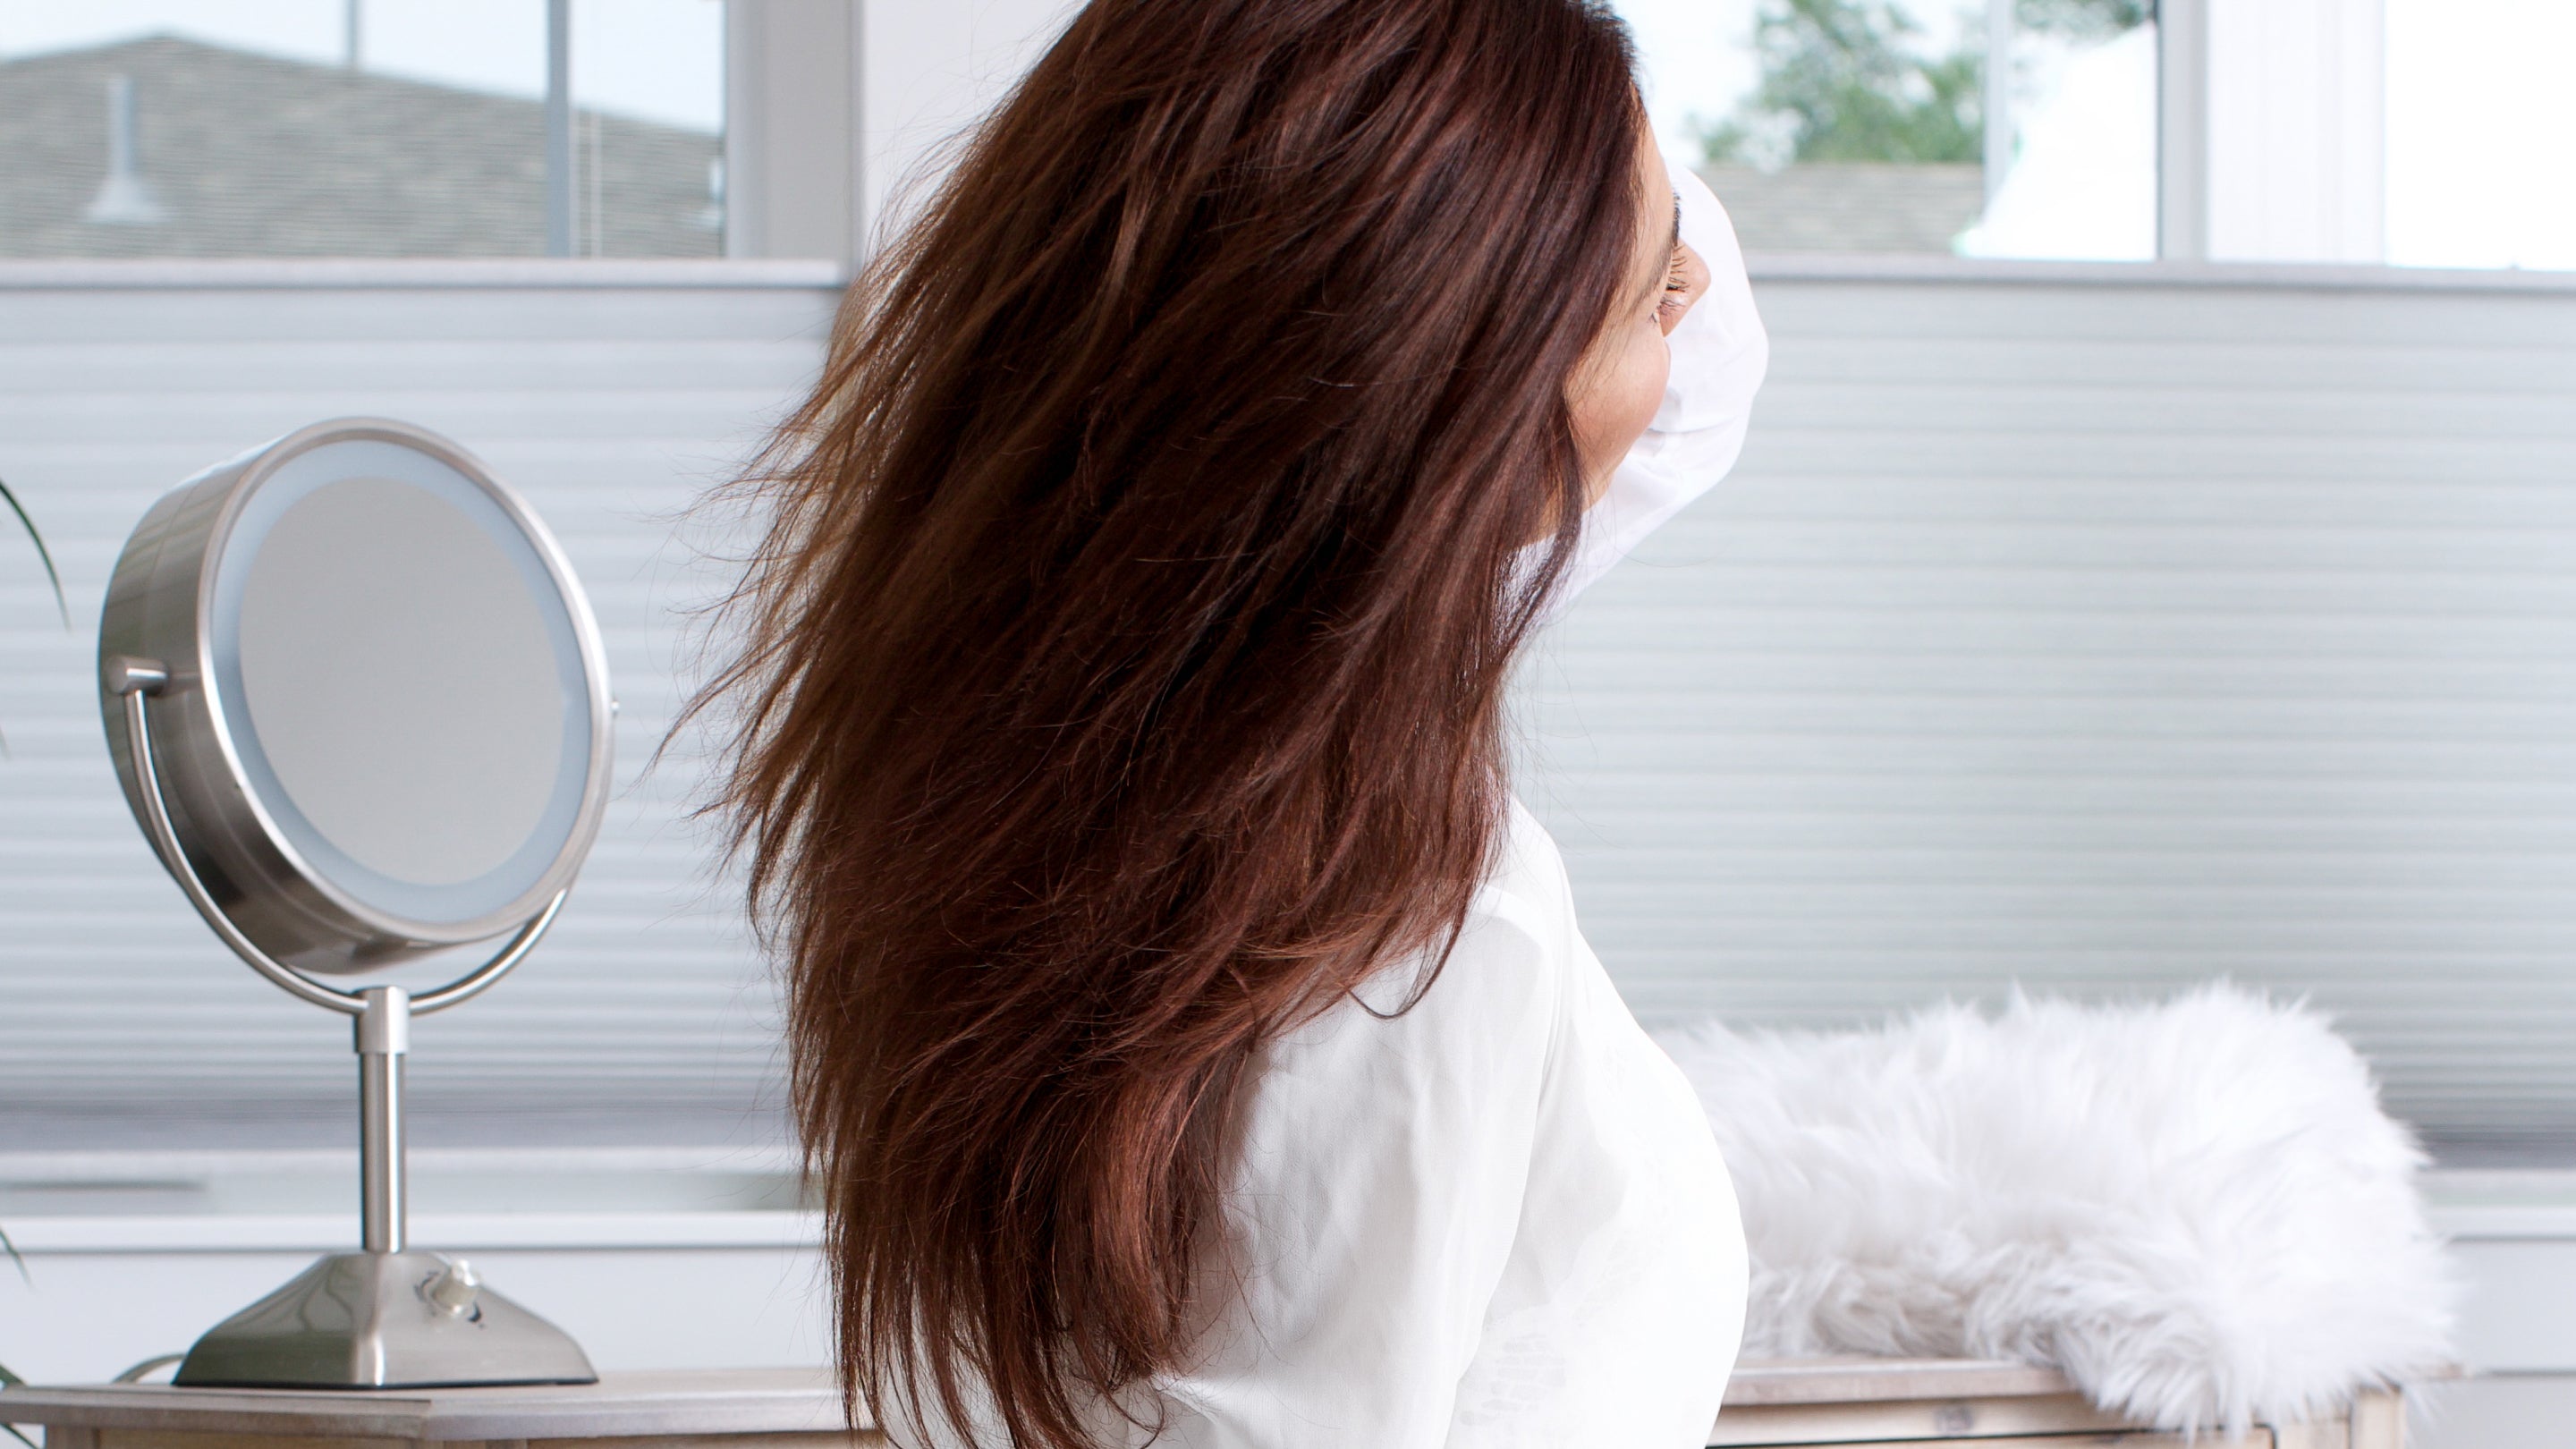 Top 3 Gentle Hair Tips for the Fall